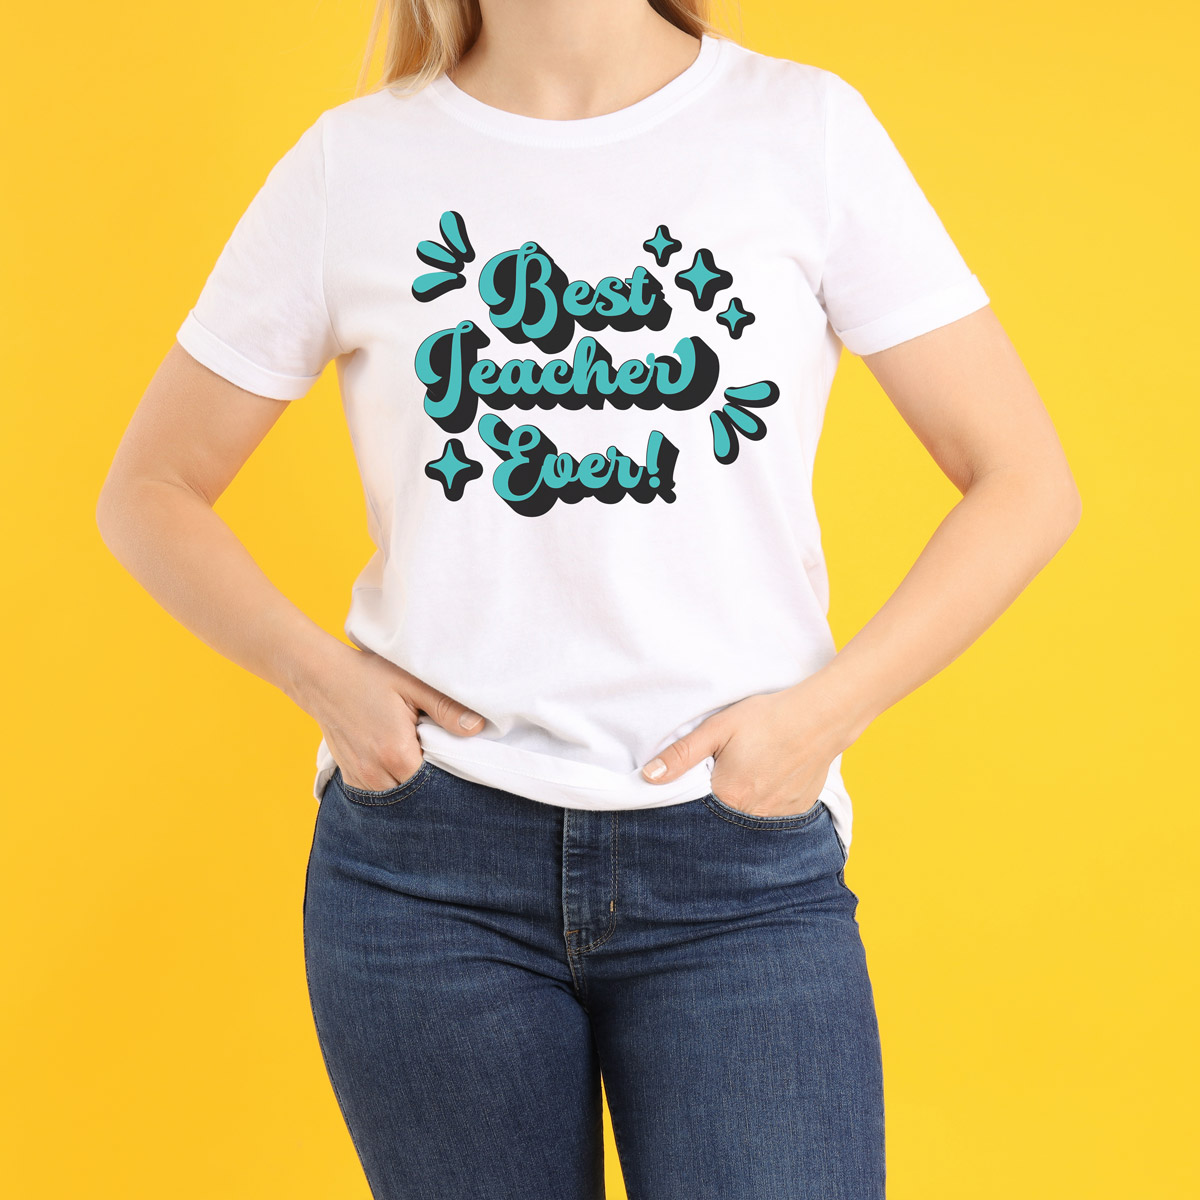 This image shows a woman wearing a shirt that says best teacher ever. It is the best teacher svg free file you can get in this post.